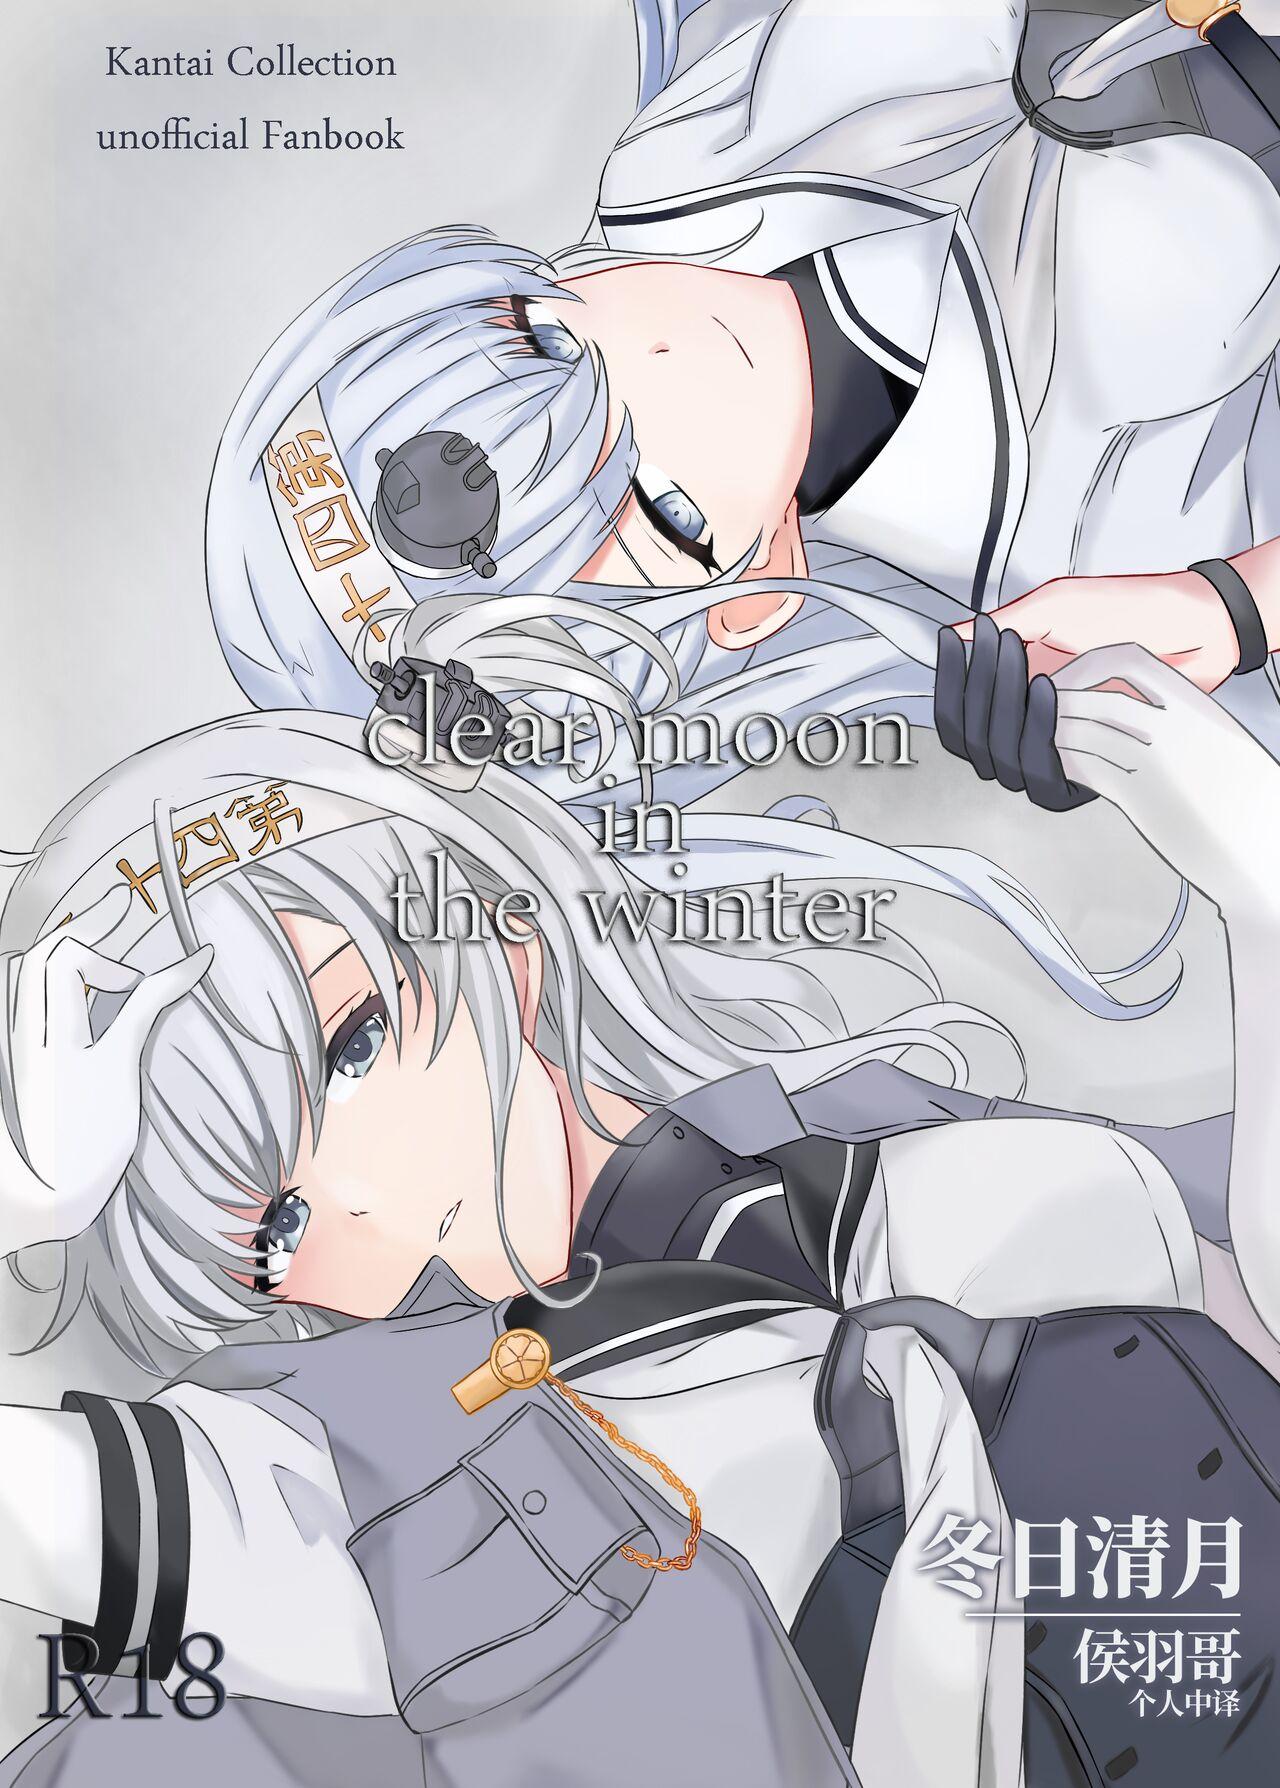 Blowjobs clear moon in the winter | 冬日清月 - Kantai collection Cum In Mouth - Picture 1